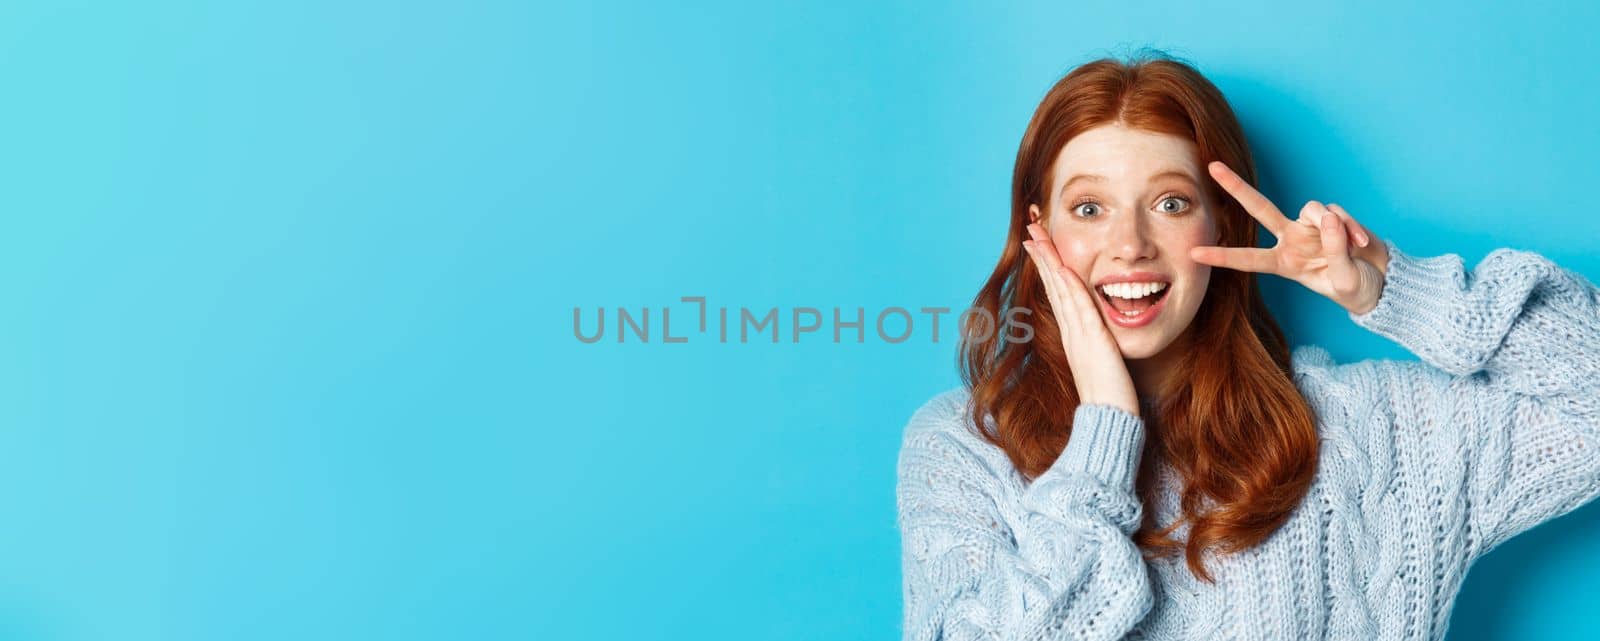 Close-up of beautiful smiling girl with red hair, showing peace kawaii sign and gazing at camera, standing over blue background.